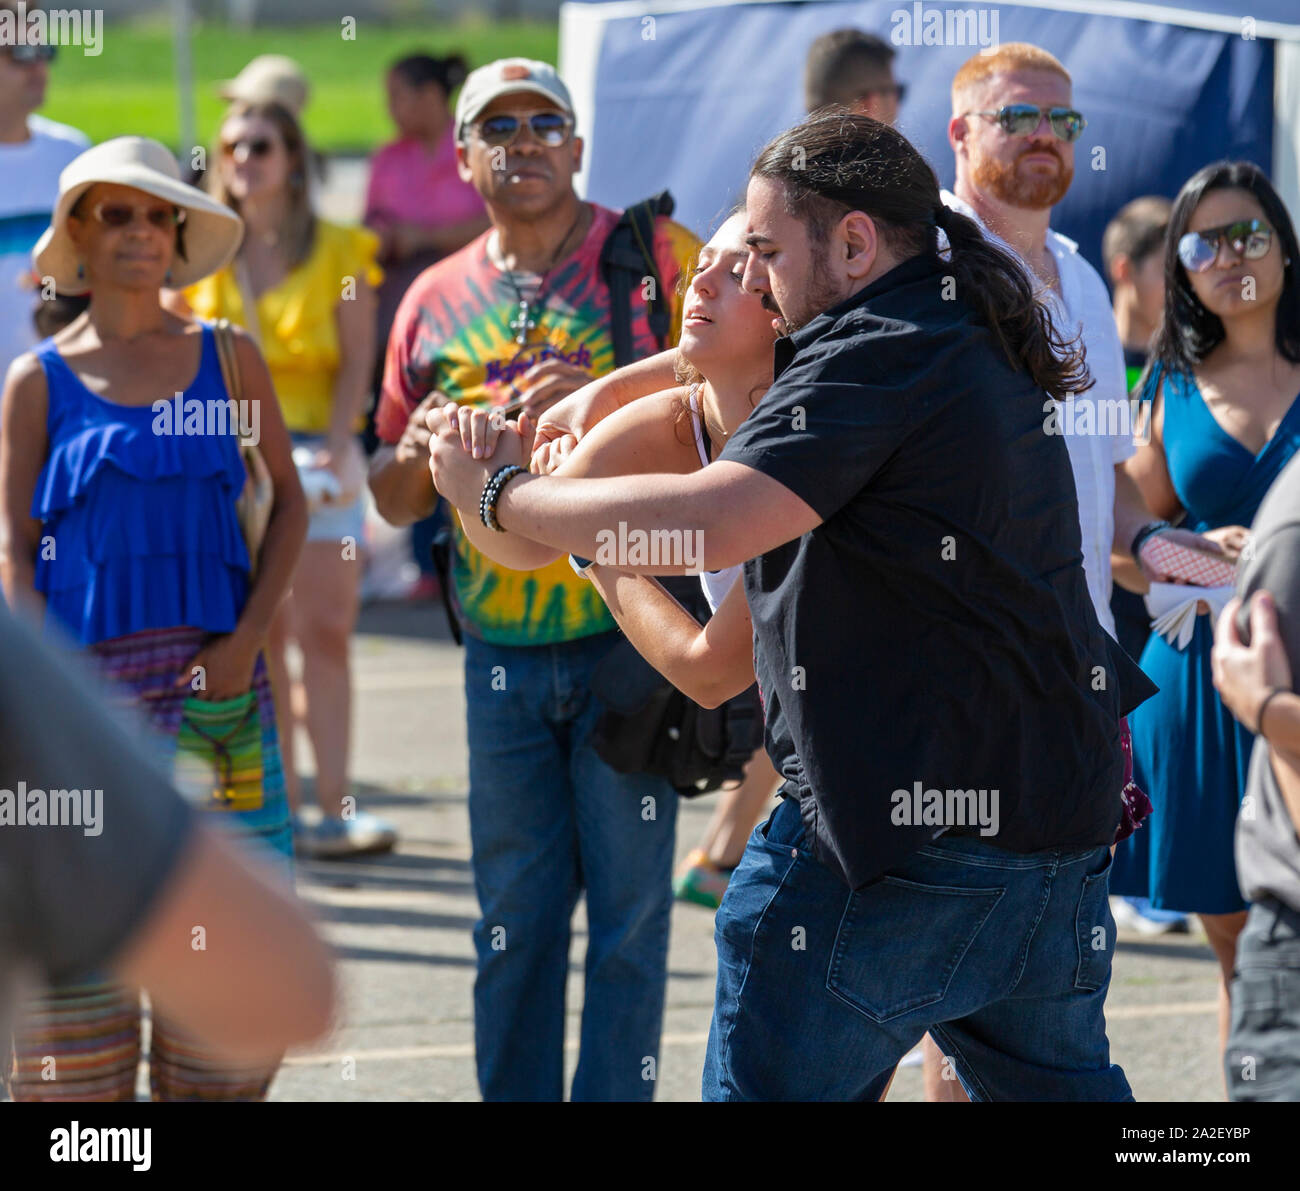 Detroit, Michigan - The annual Brazil Day Street Festival featured food and a samba dance contest. Stock Photo